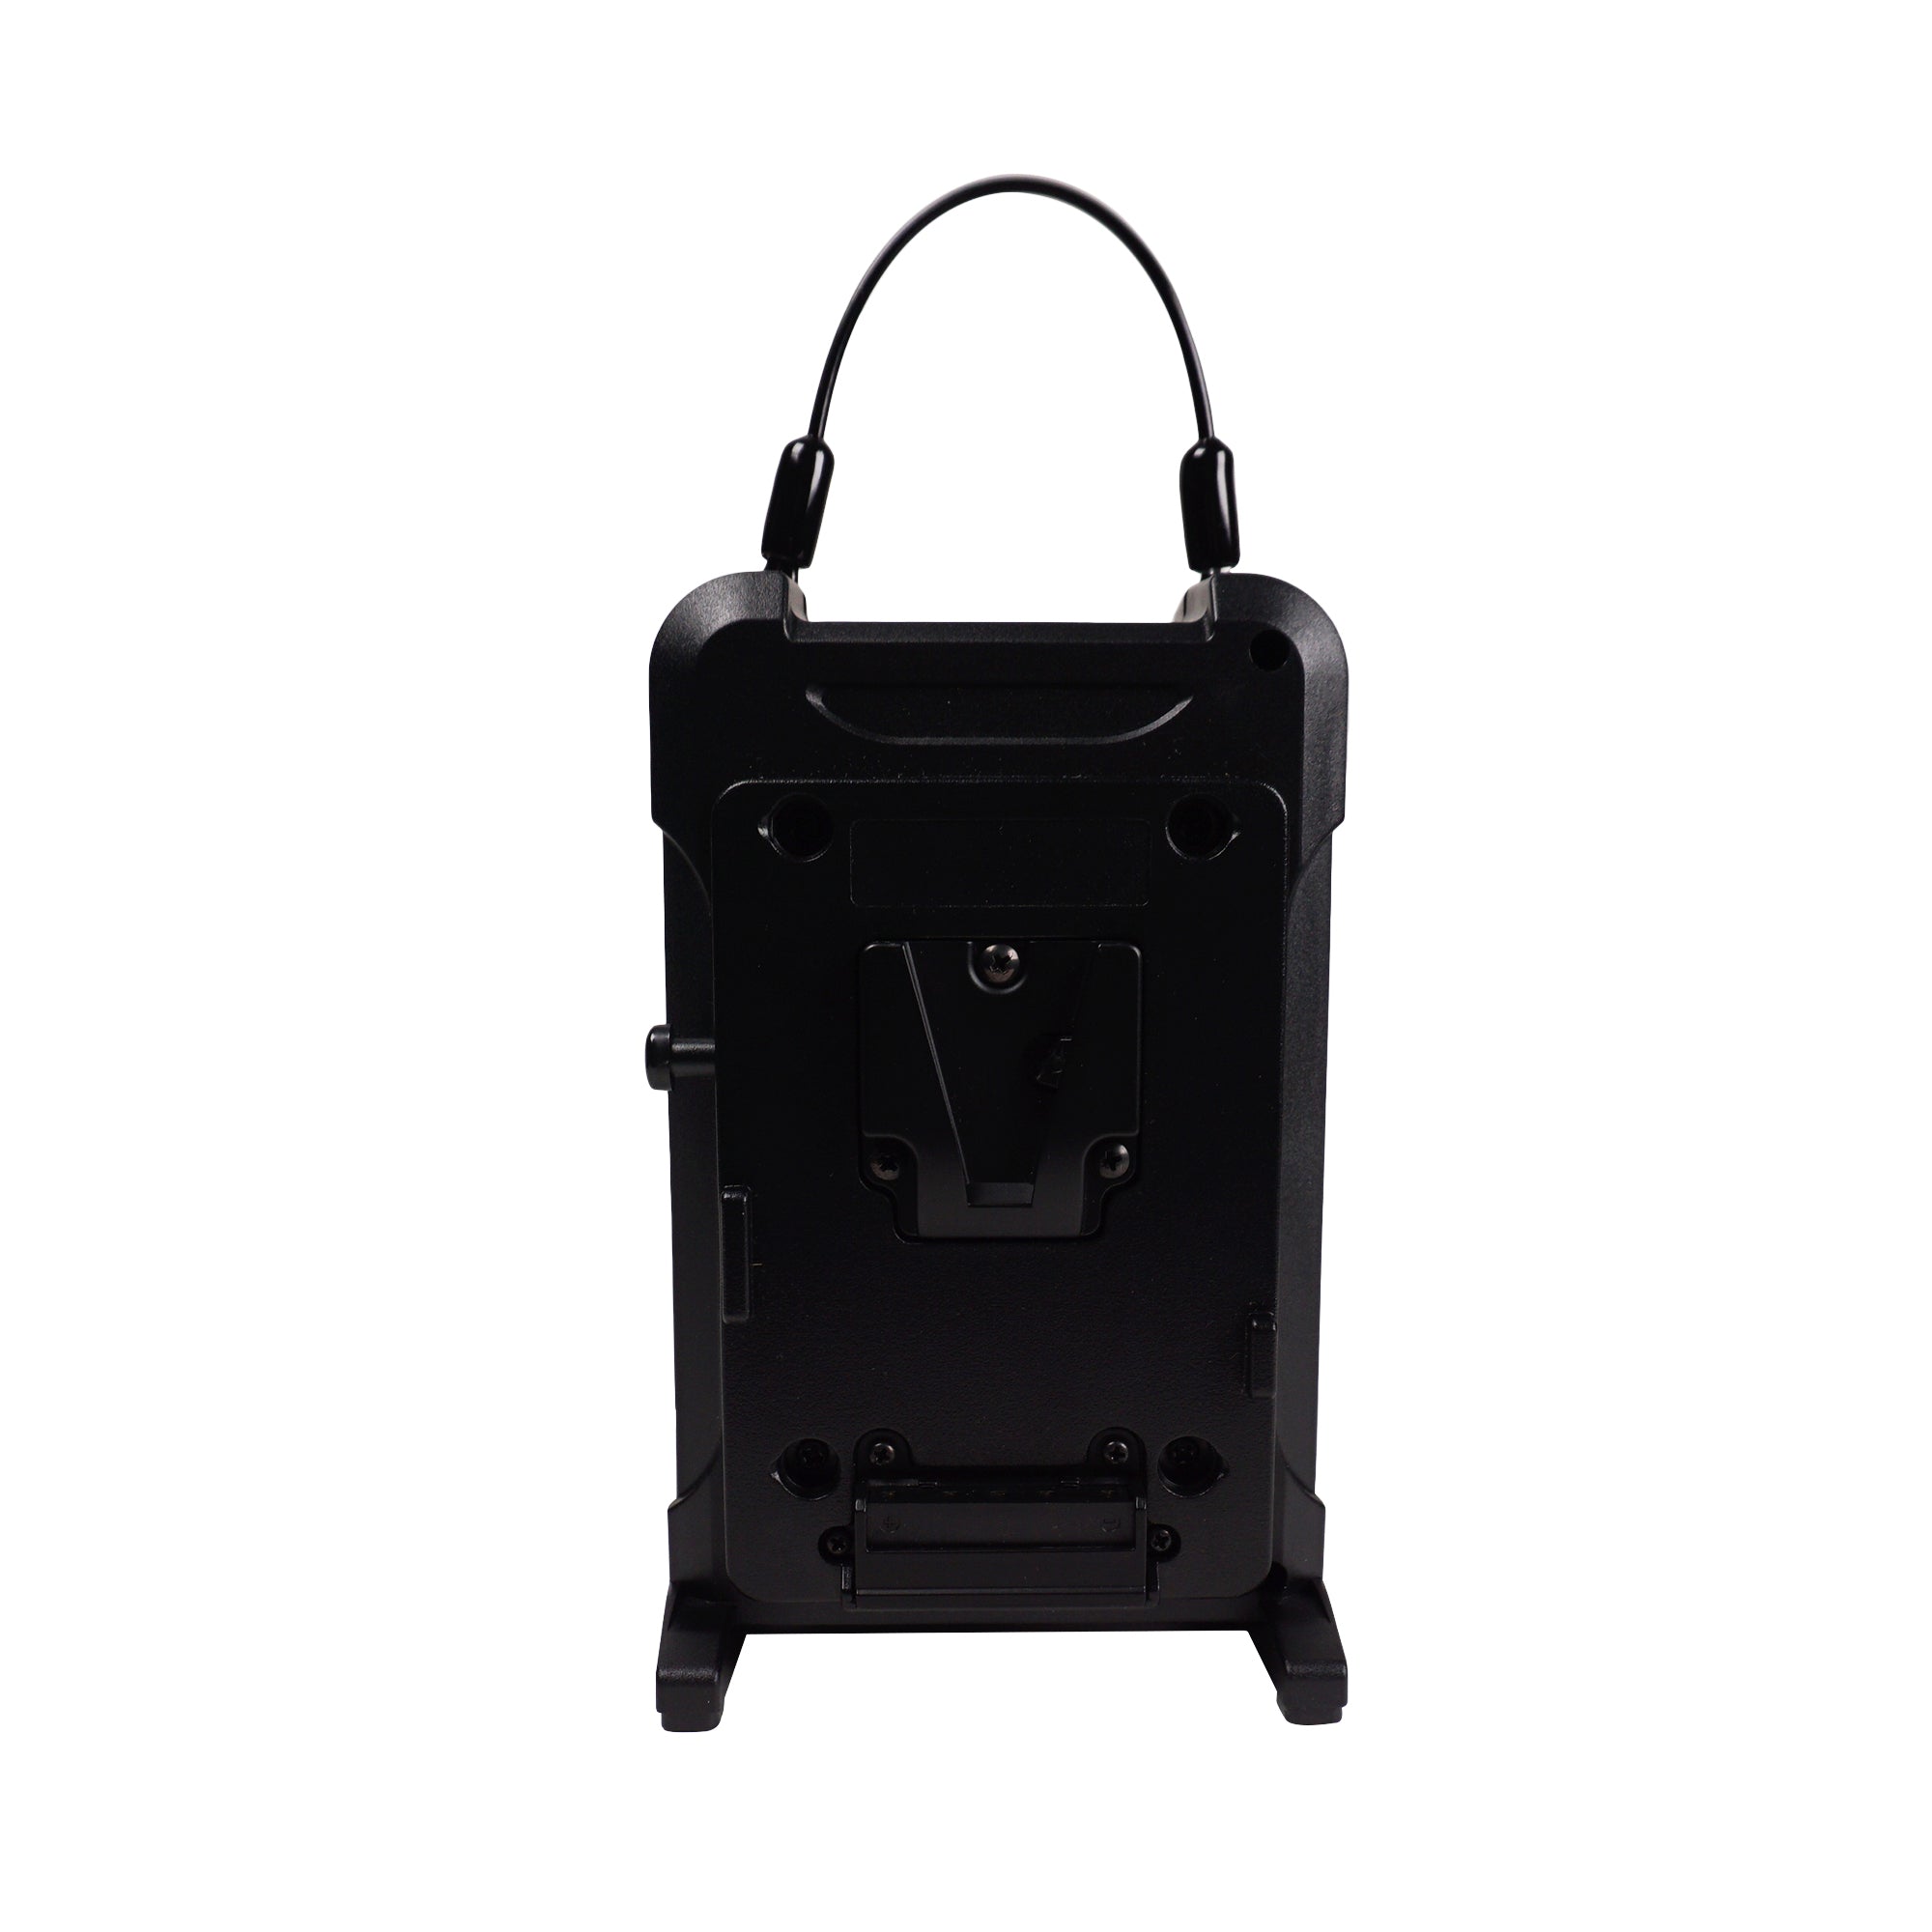 Dual V-Mount Battery Intelligent Charger Indipro Tools 